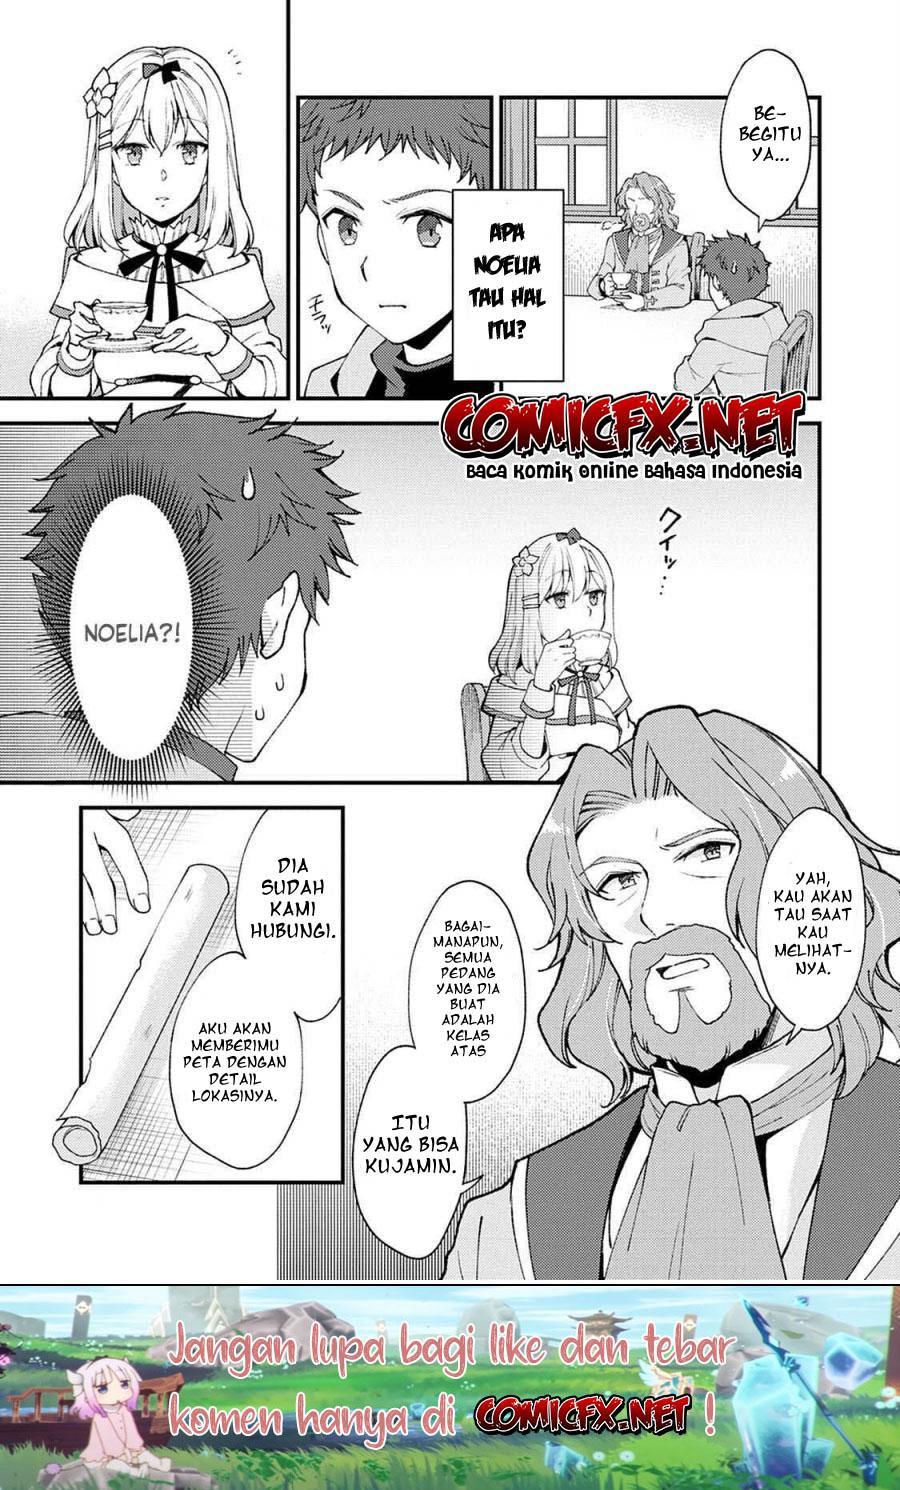 A Sword Master Childhood Friend Power Harassed Me Harshly, So I Broke Off Our Relationship And Make A Fresh Start At The Frontier As A Magic Swordsman Chapter 8.2 - 101